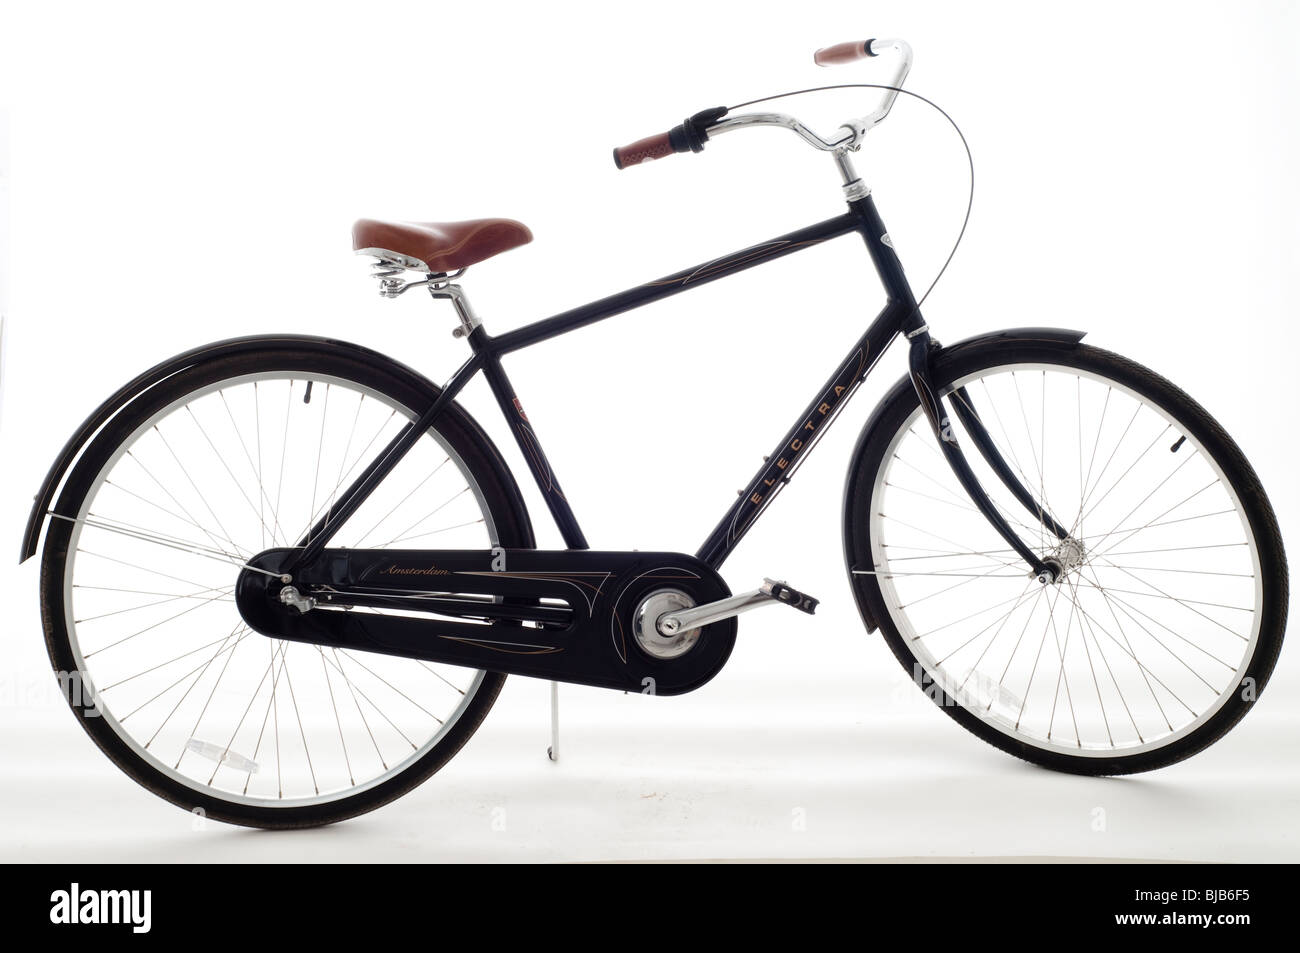 New Electra bike (Amsterdam)  with mudguards, leather seats and  handles on white background Stock Photo